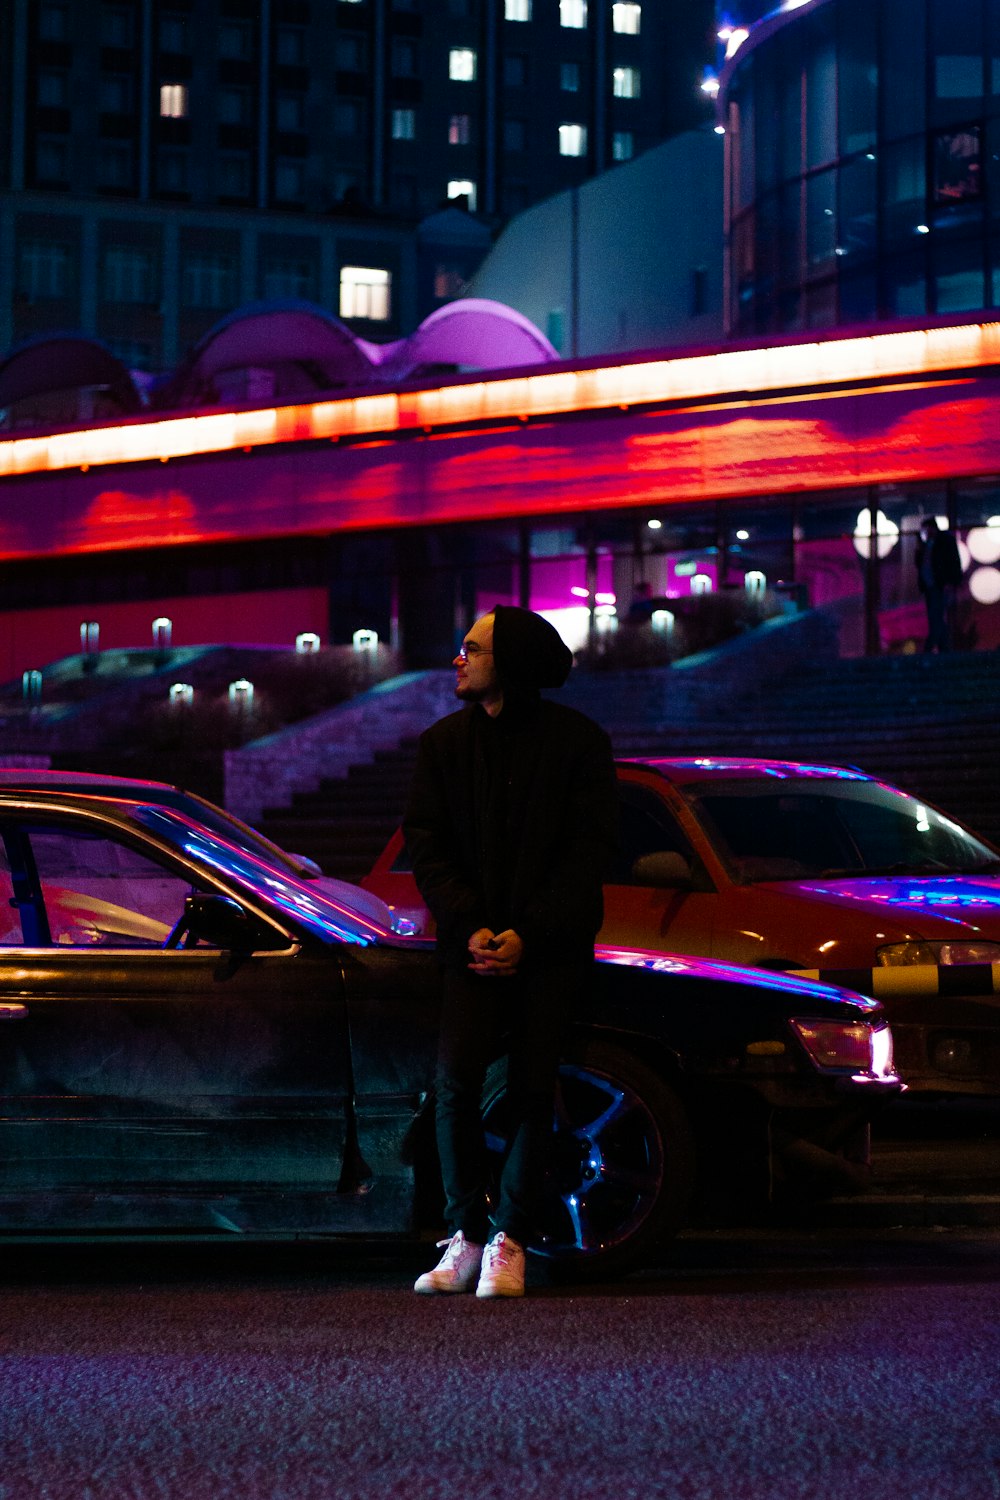 a man standing next to a parked car at night